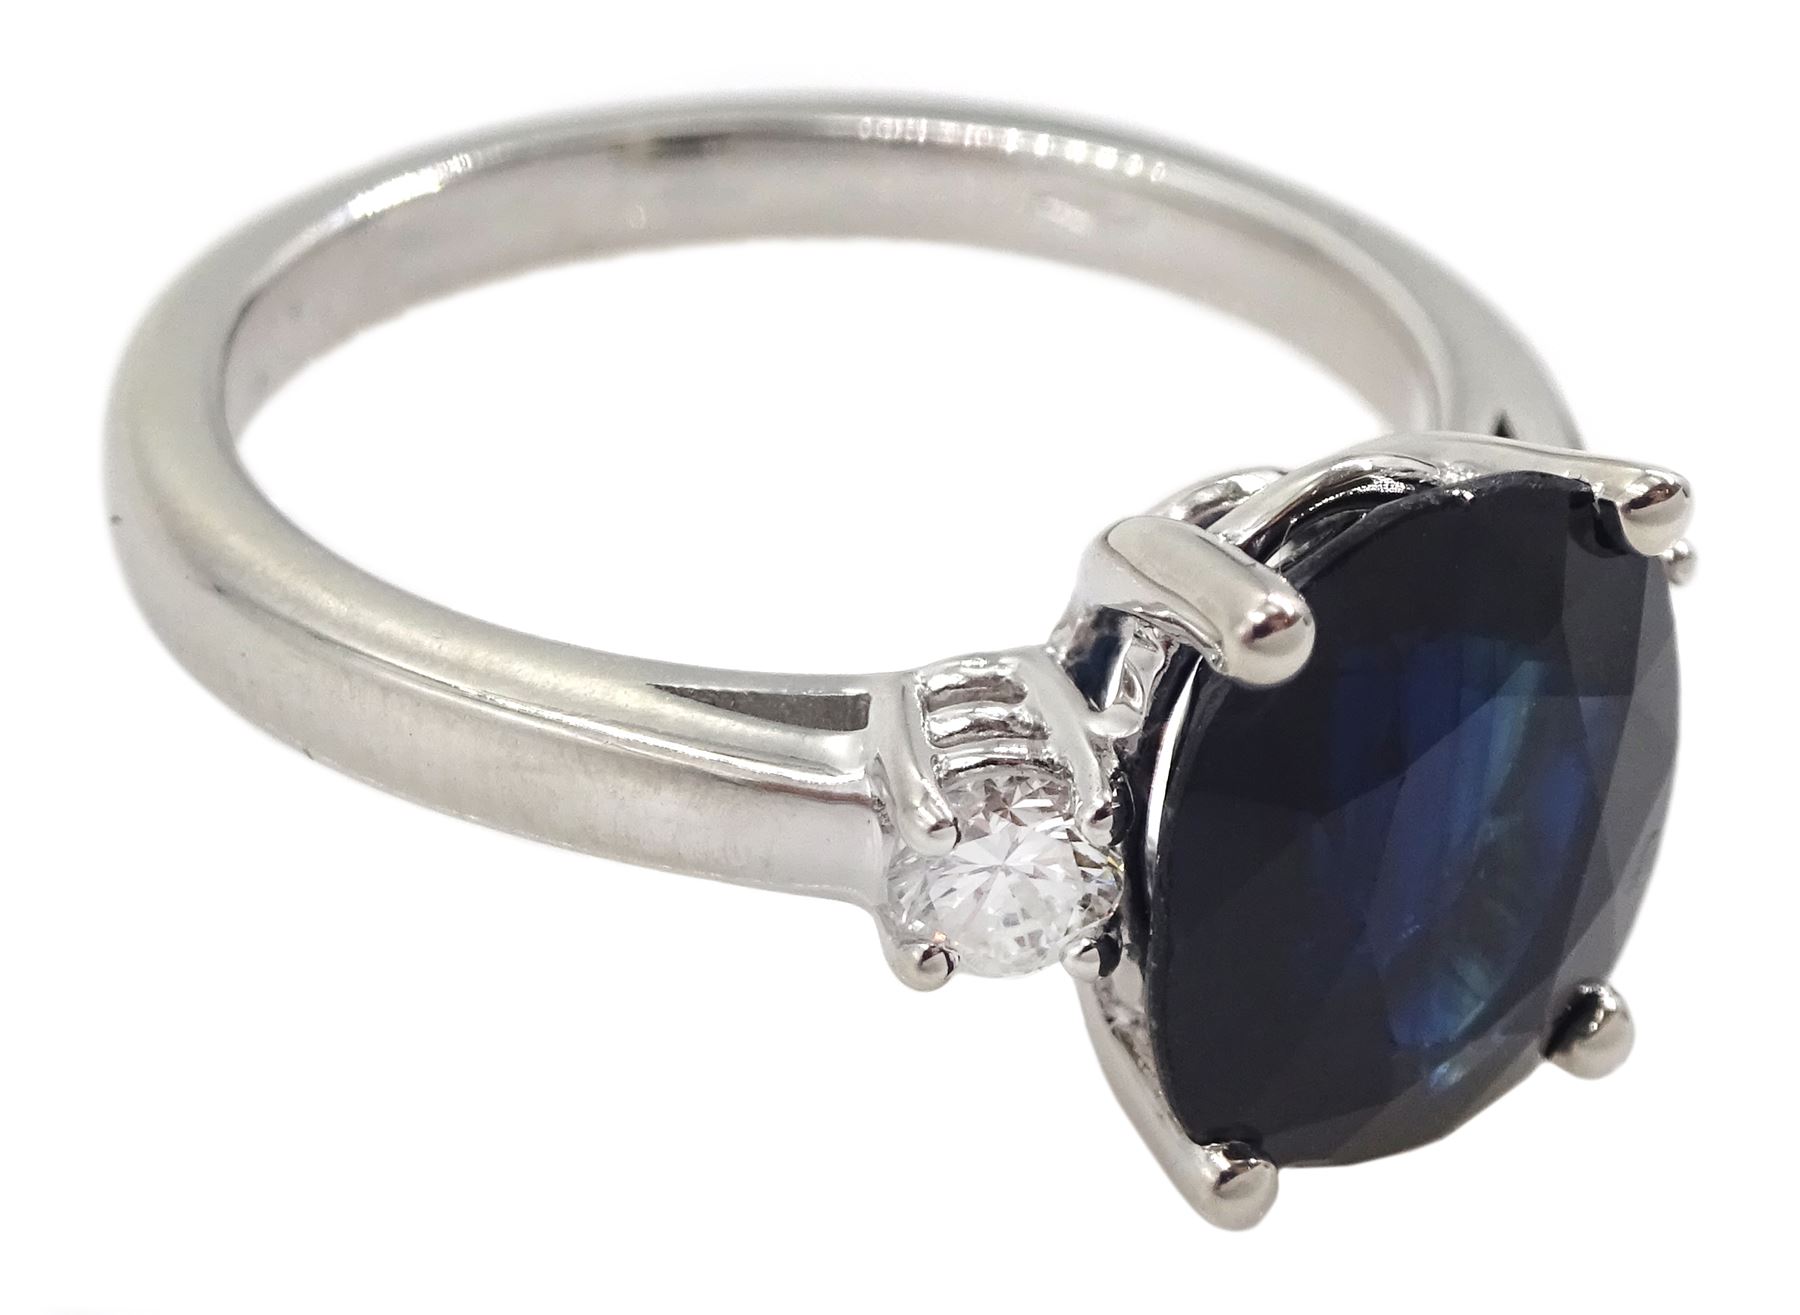 18ct white gold three stone oval mix cut sapphire and round brilliant cut diamond ring - Image 3 of 4